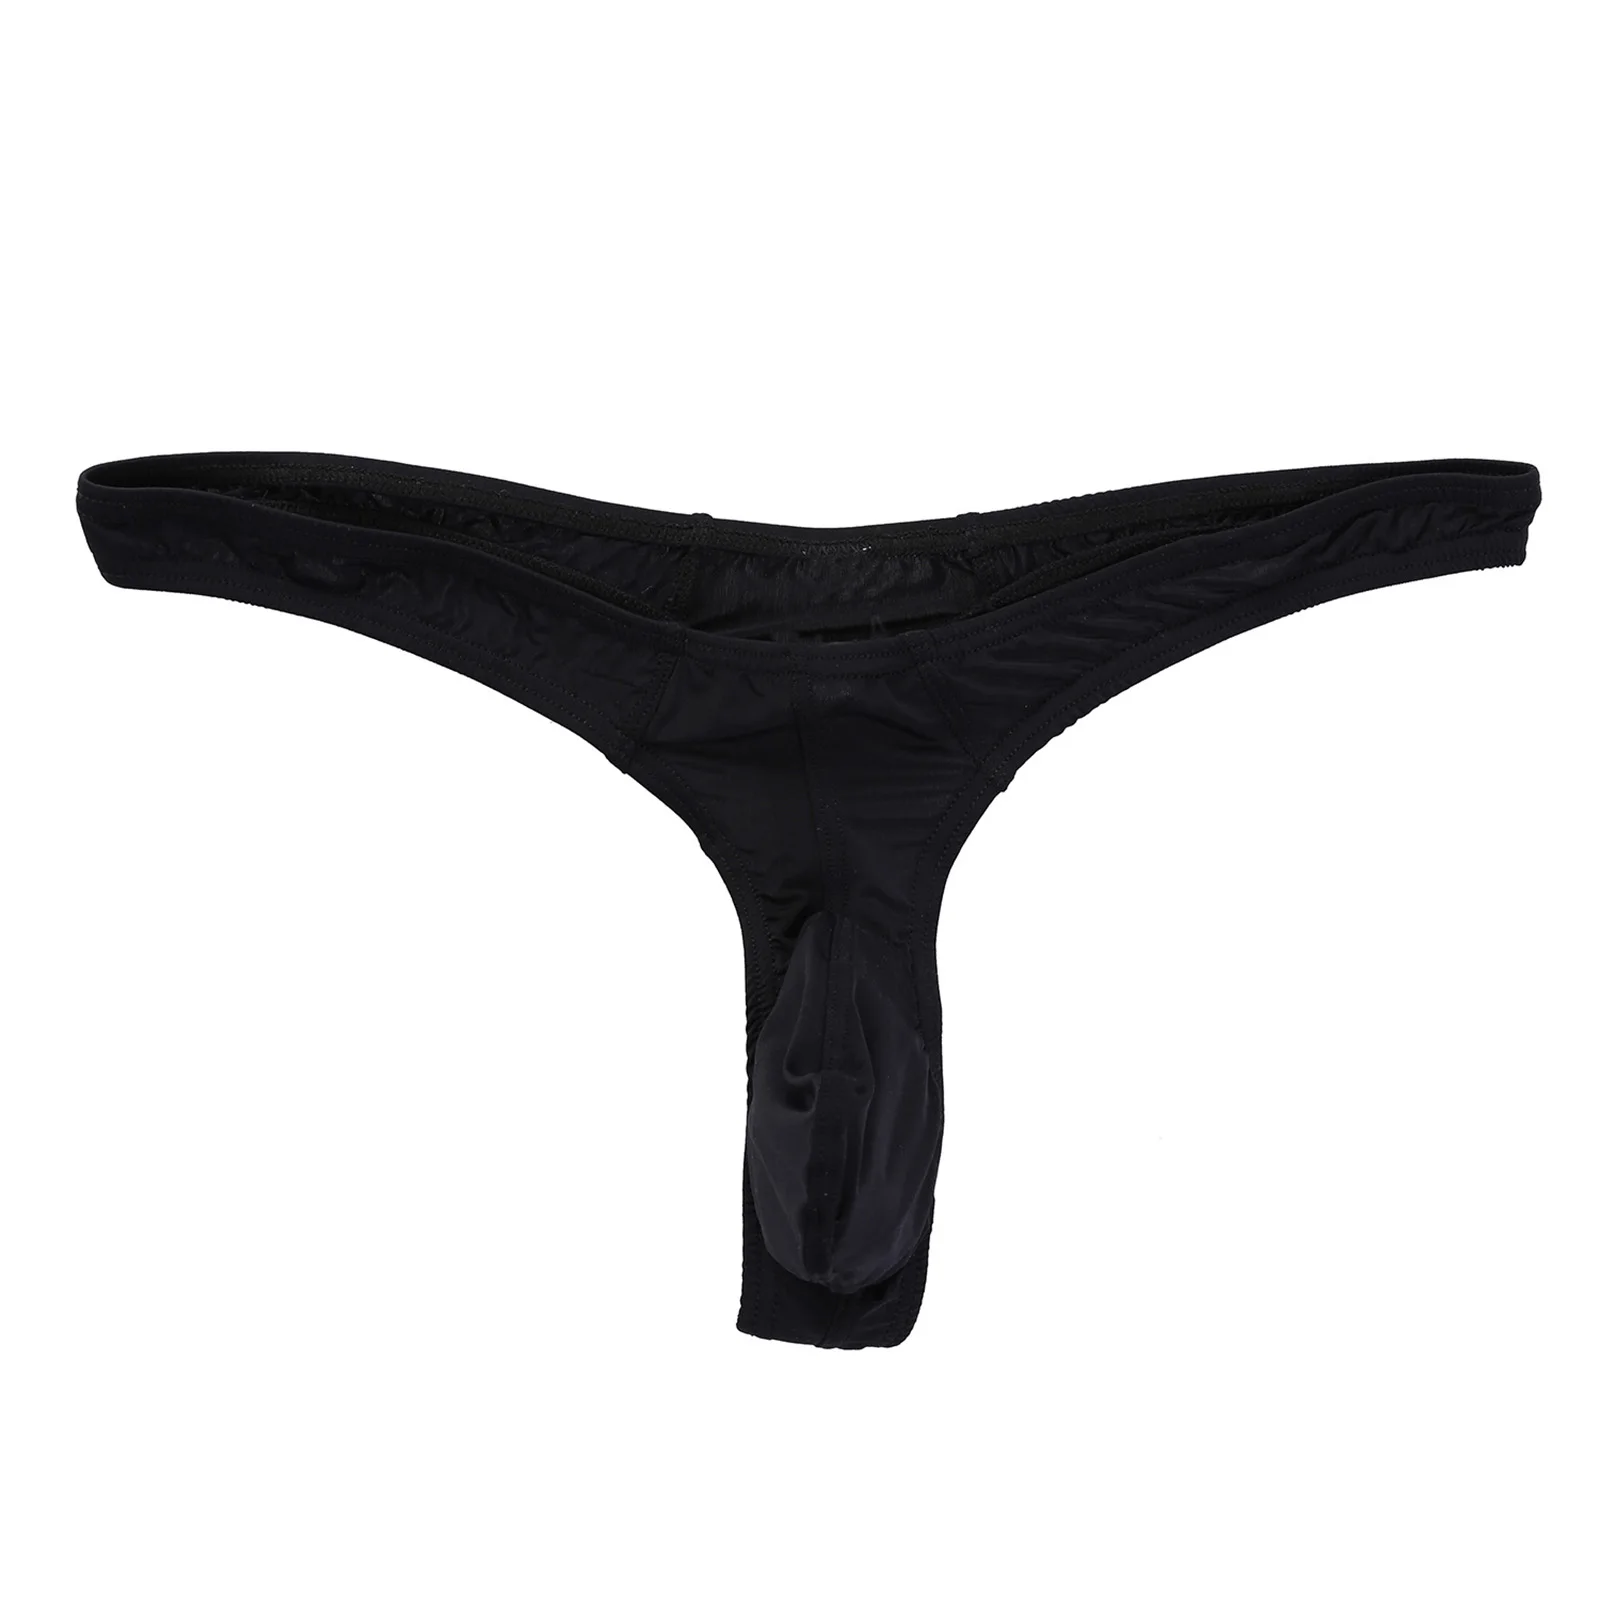 v string lace Mens Soft Breathable Underpants Bulge Pouch Thong Low Waist T-back Panties Elastic Waistband G-string Briefs Lingerie Underwear briefs for women